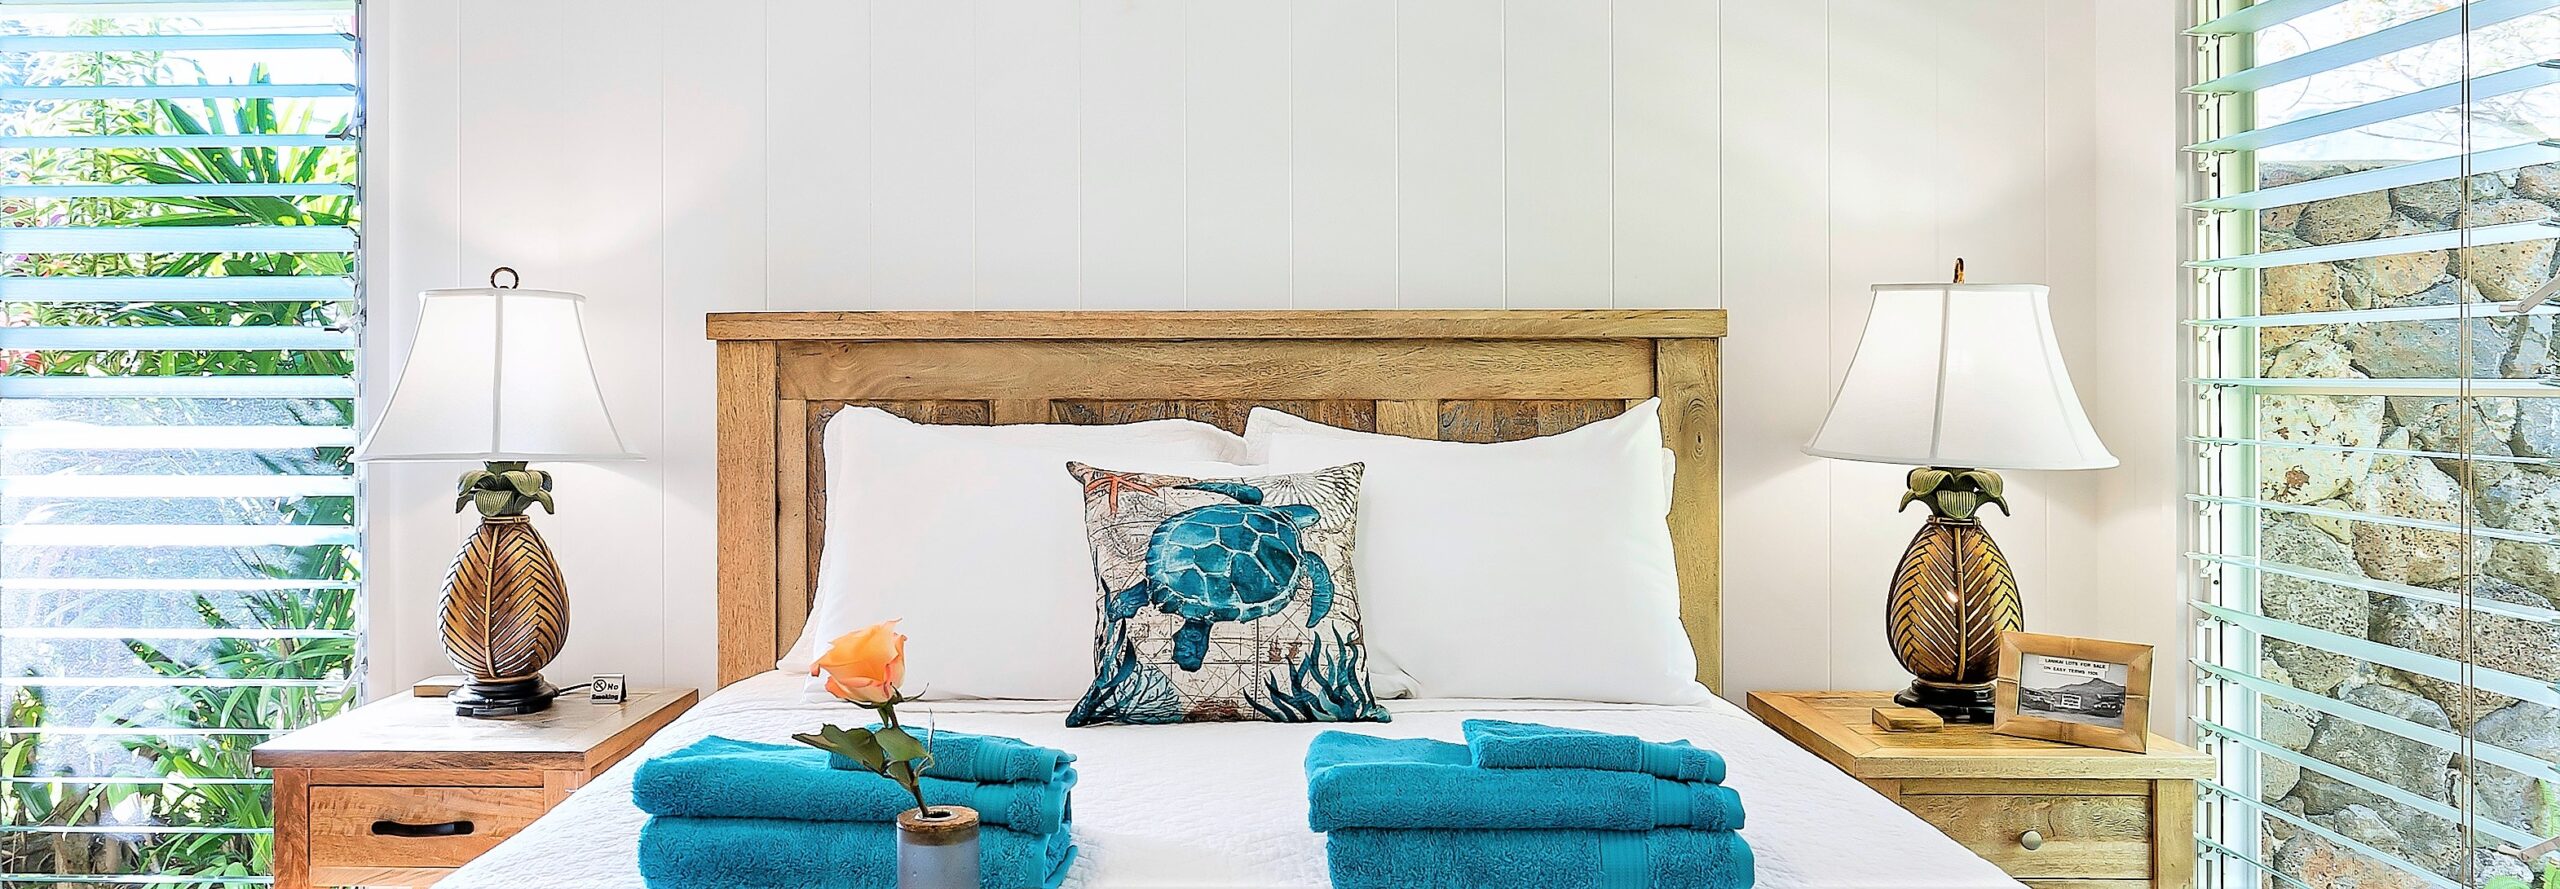 A bed is set on a back white wall with beep turquoise towels prepared on the cover and a cheerful pillow depicting a turtle. Two long windows on each side bright lots of saturated light into the room.